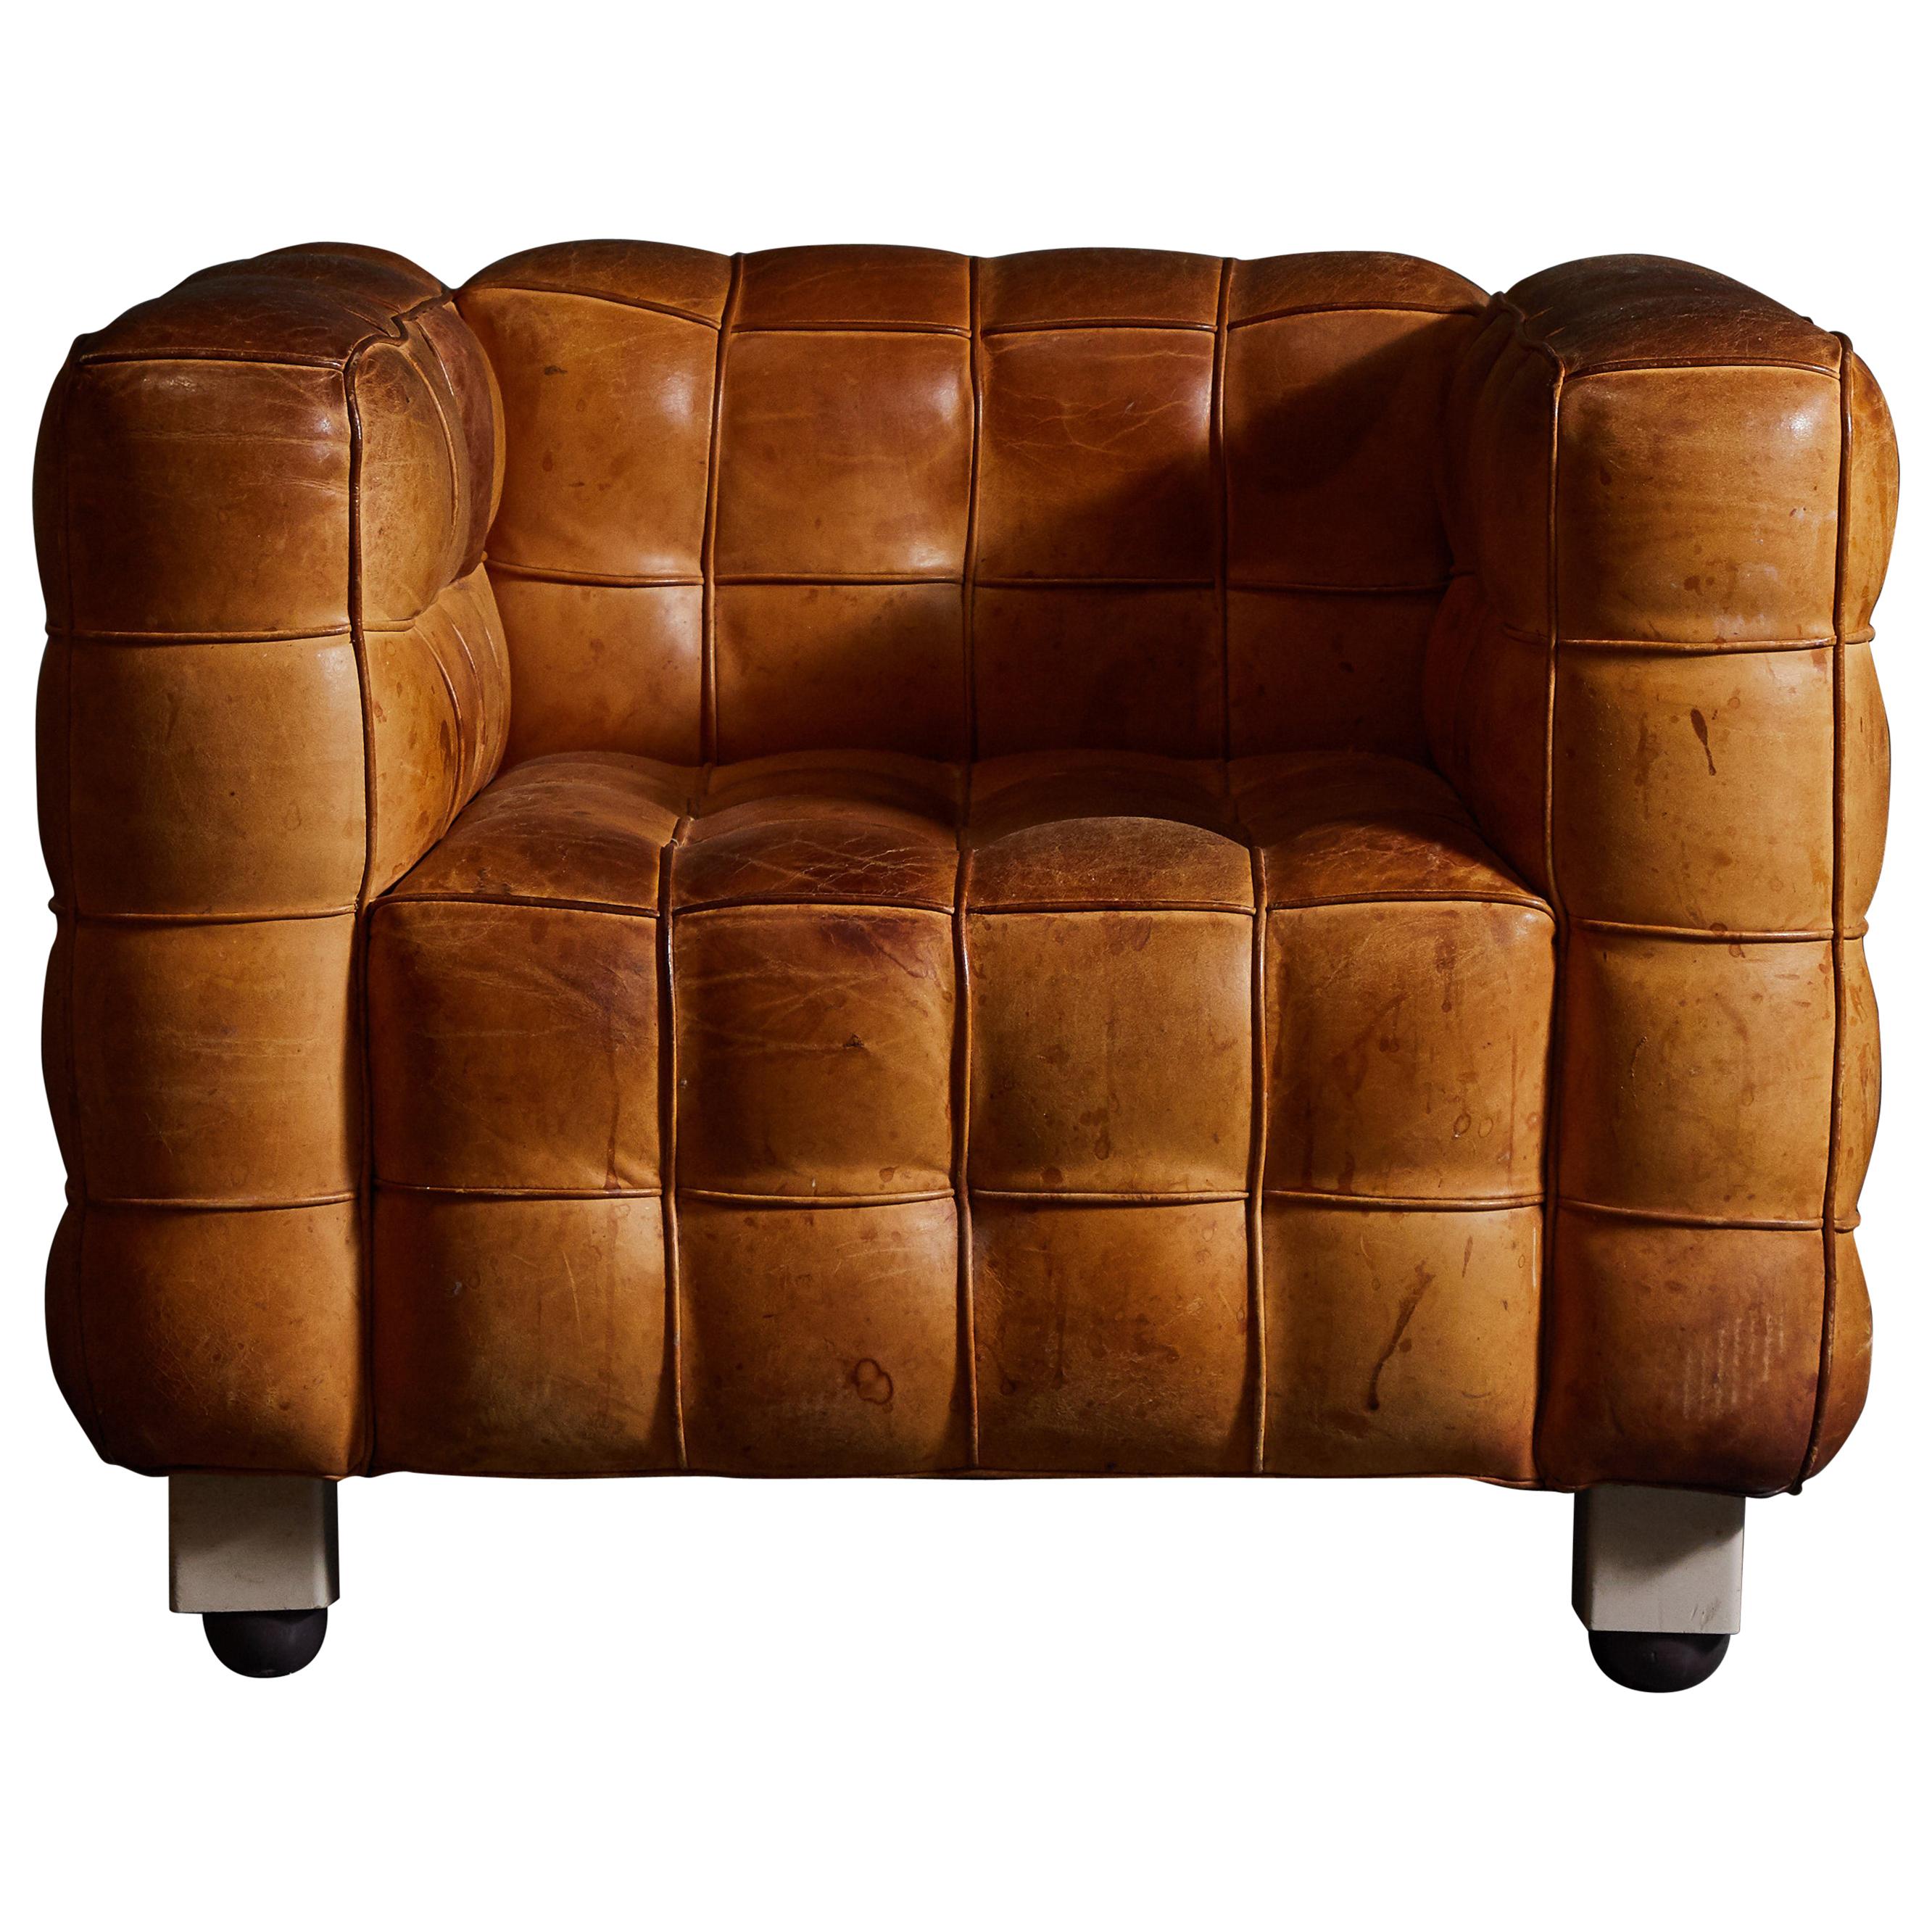 Patinated Leather "Kubus" Club Chair by Josef Hoffman for Wittman